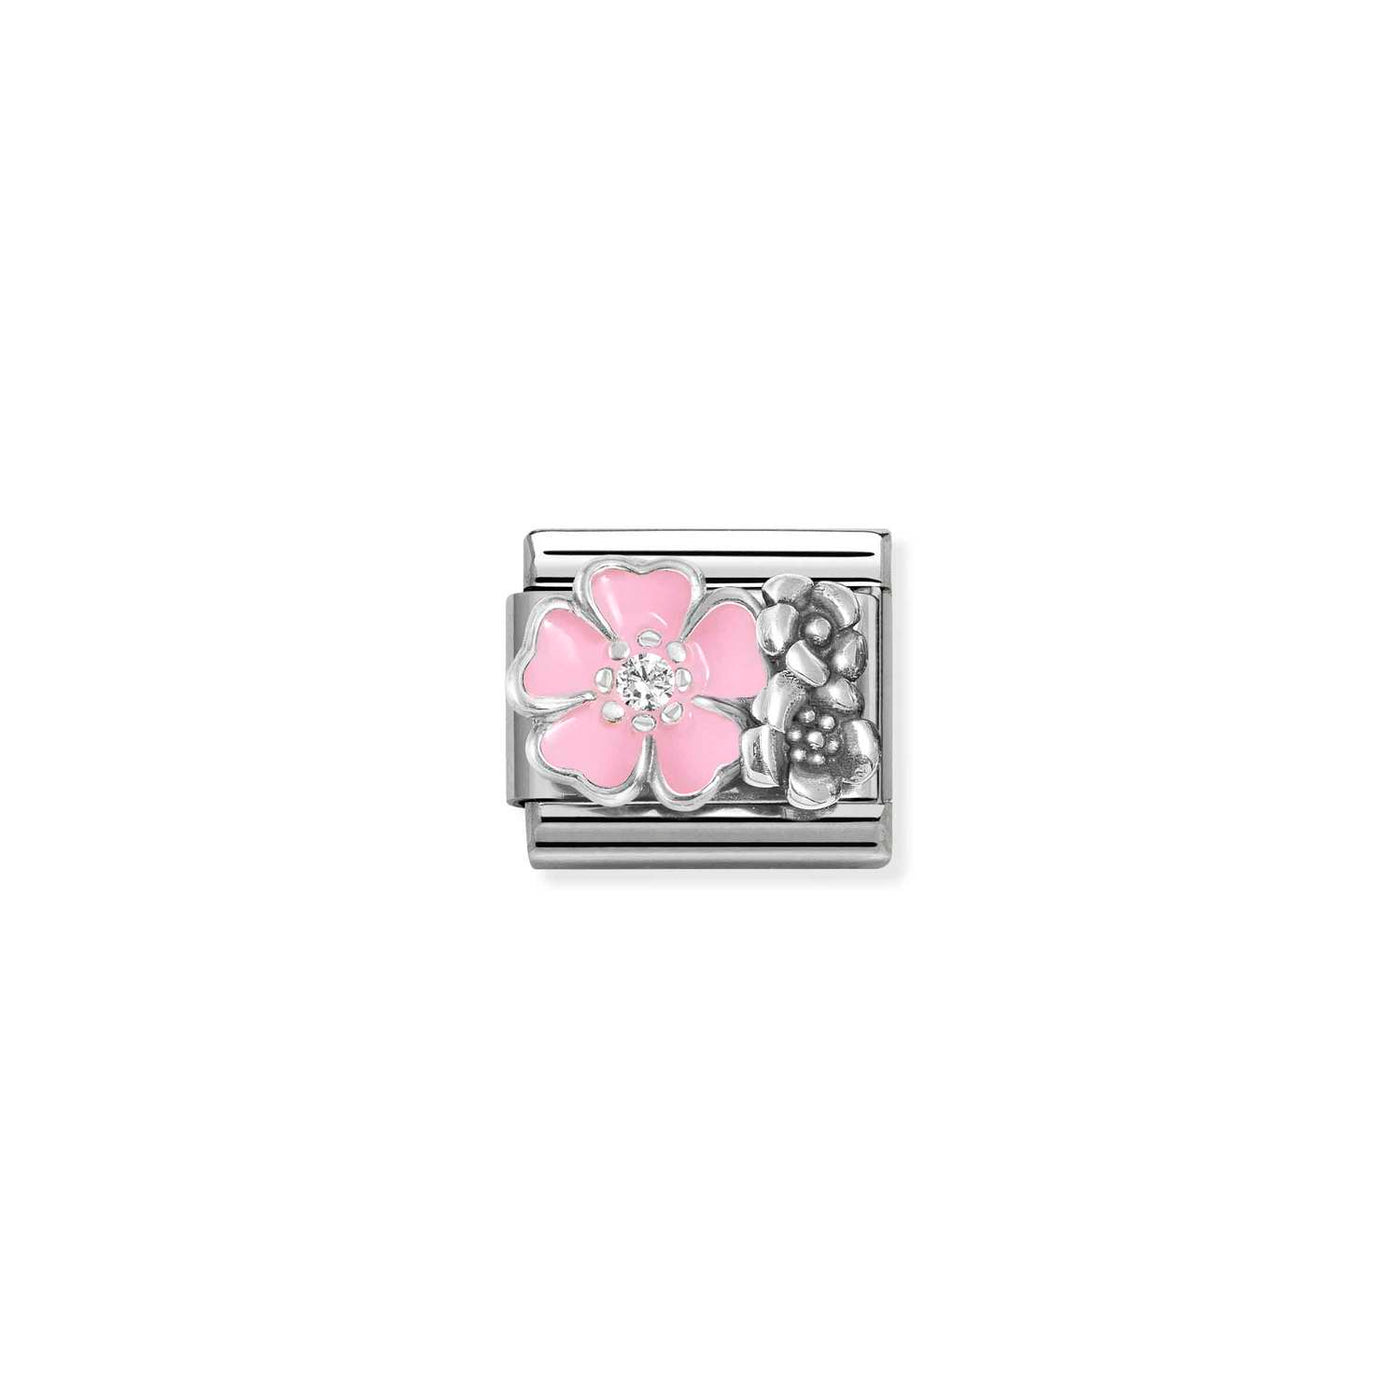 Nomination Classic Oxidised Silver Cubic Zirconia Pink Flowers Charm